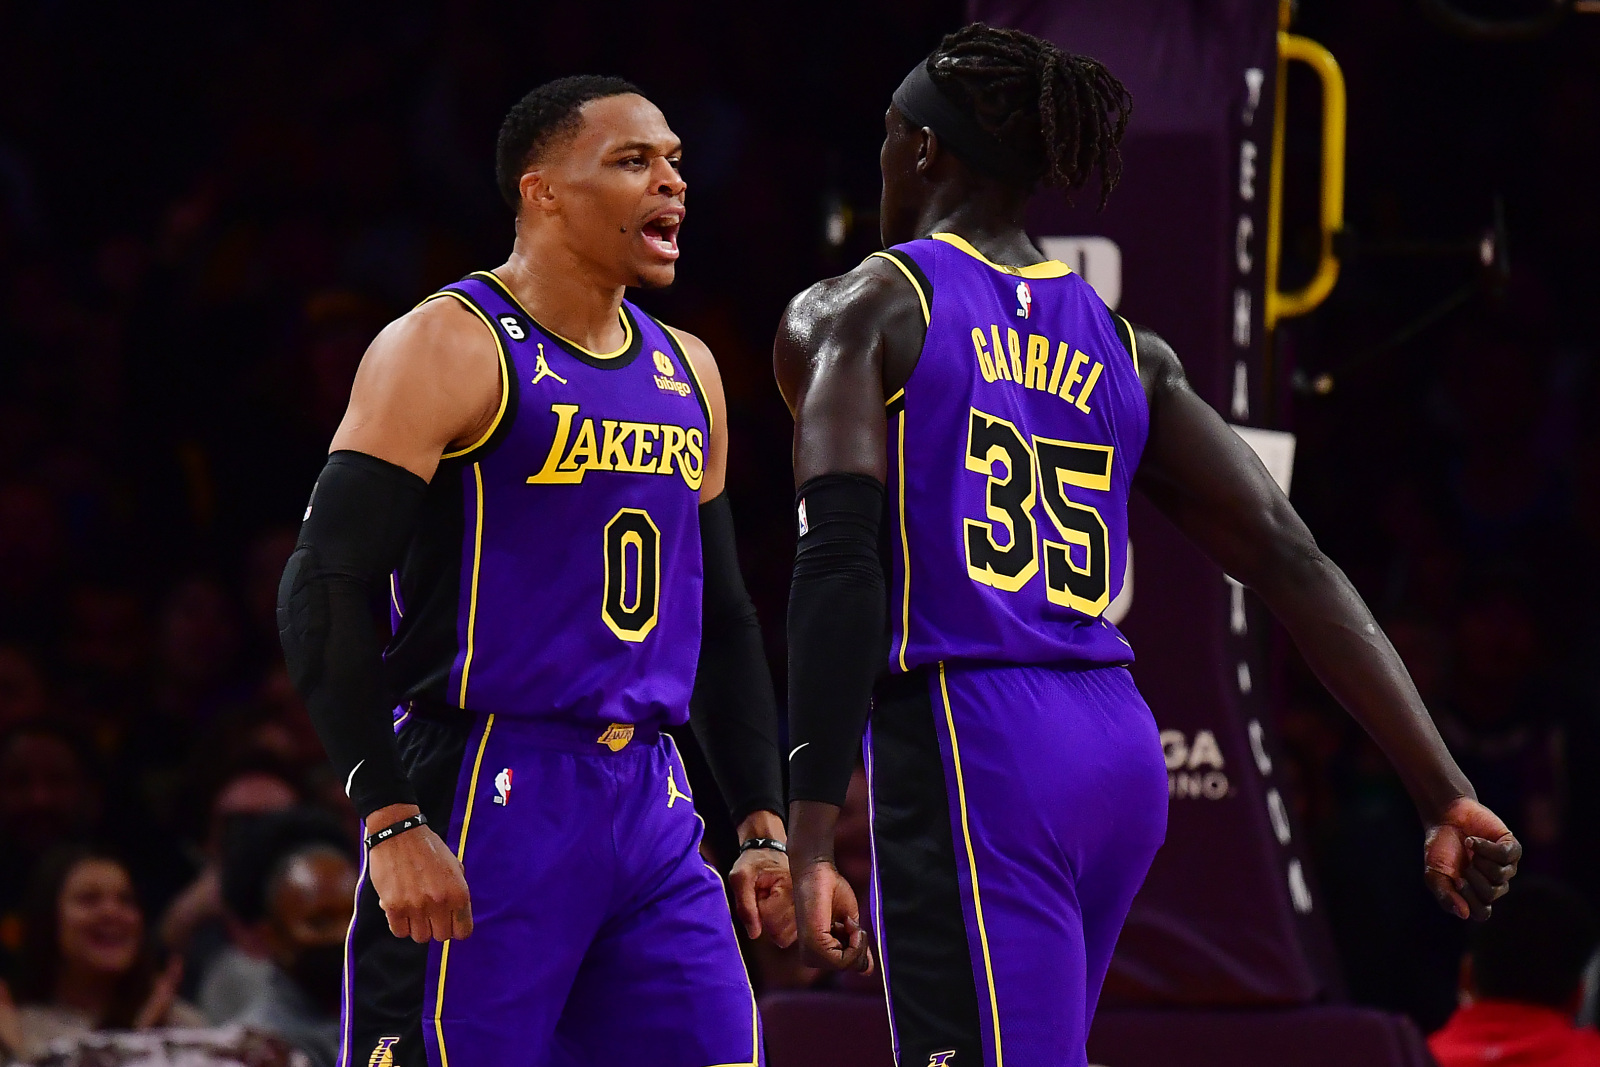 Legion Hoops on X: DEVELOPING: The Lakers and Pistons are in